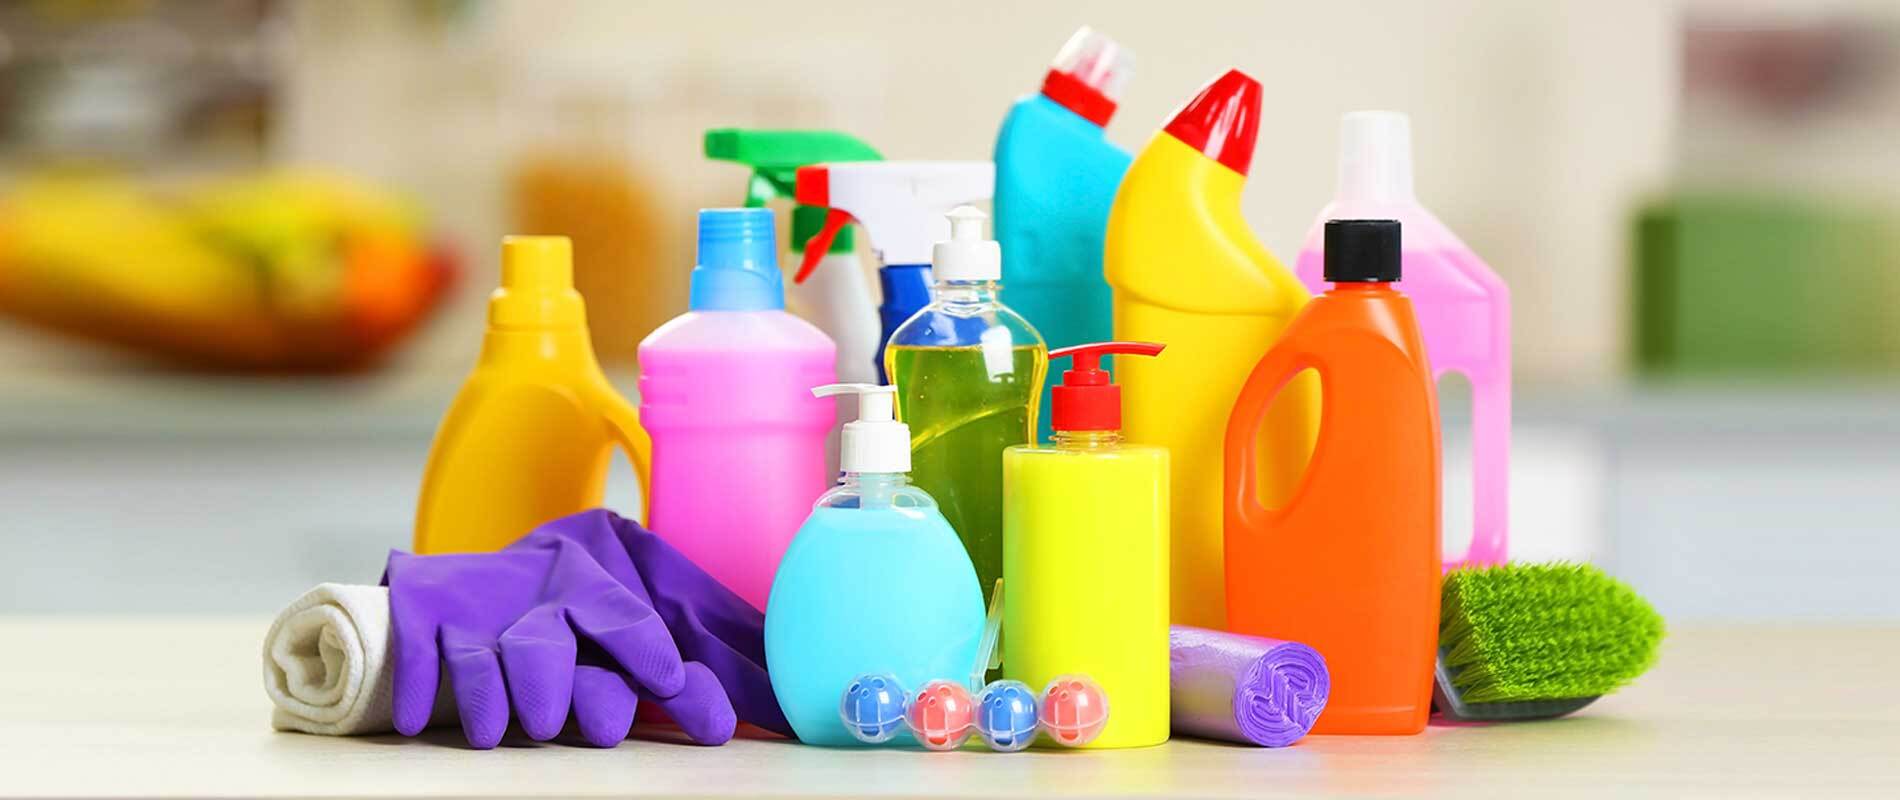 Household Cleaners That Can Kill You